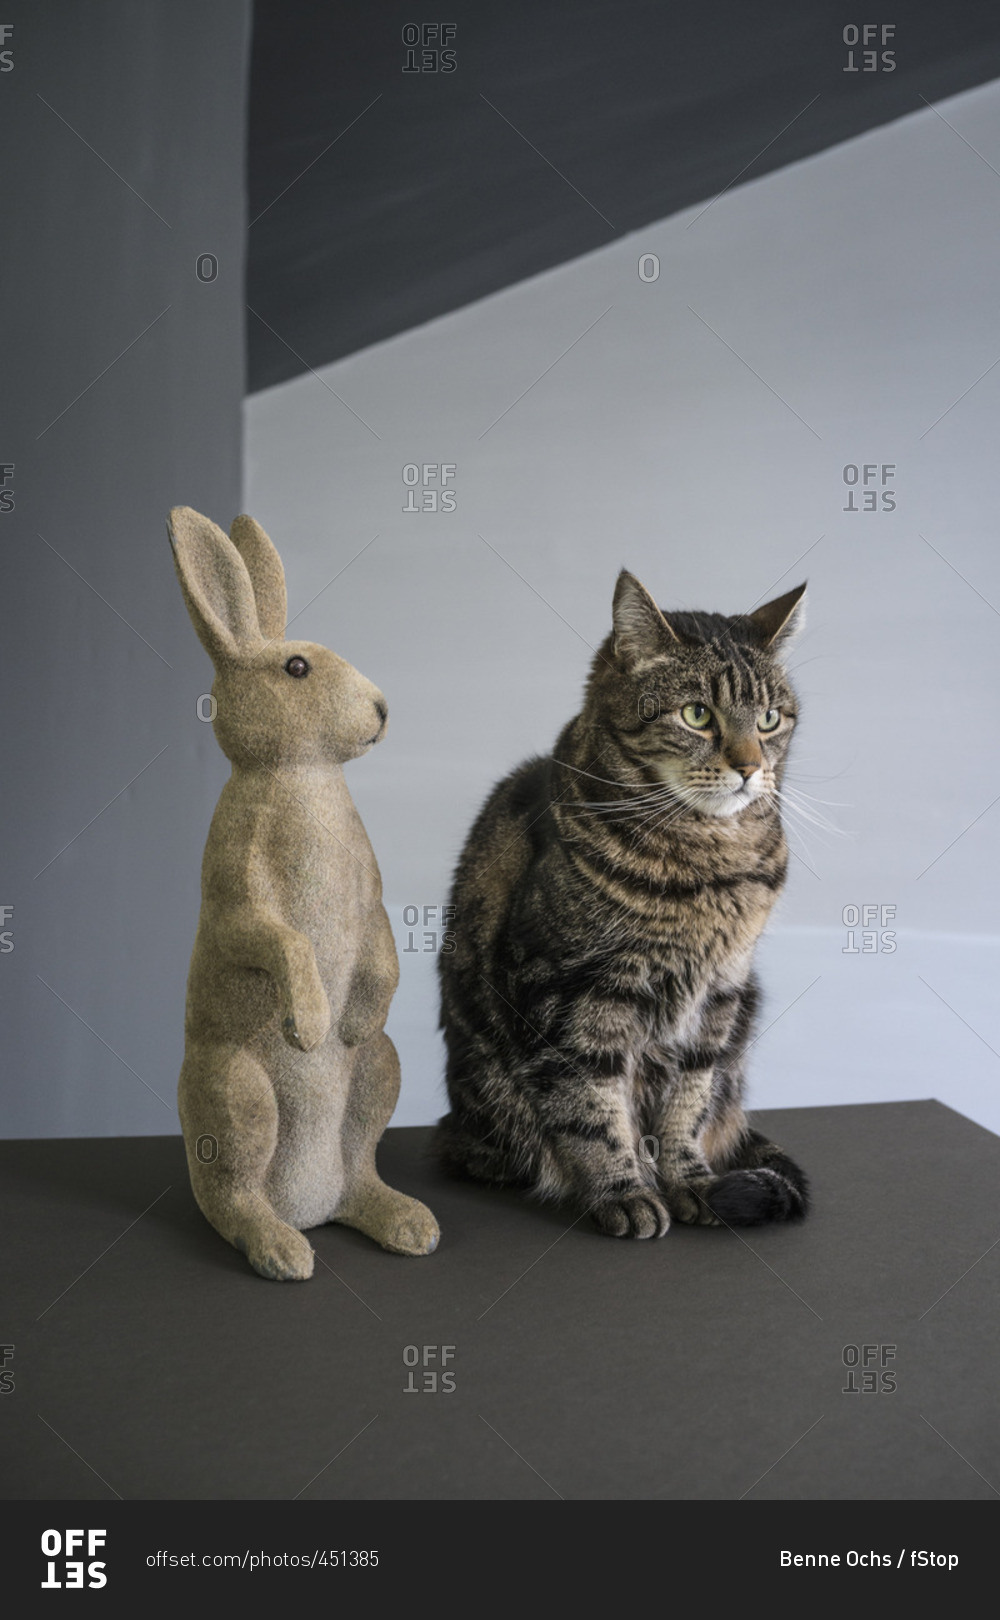 Tabby cat sitting by rabbit figurine on floor against wall